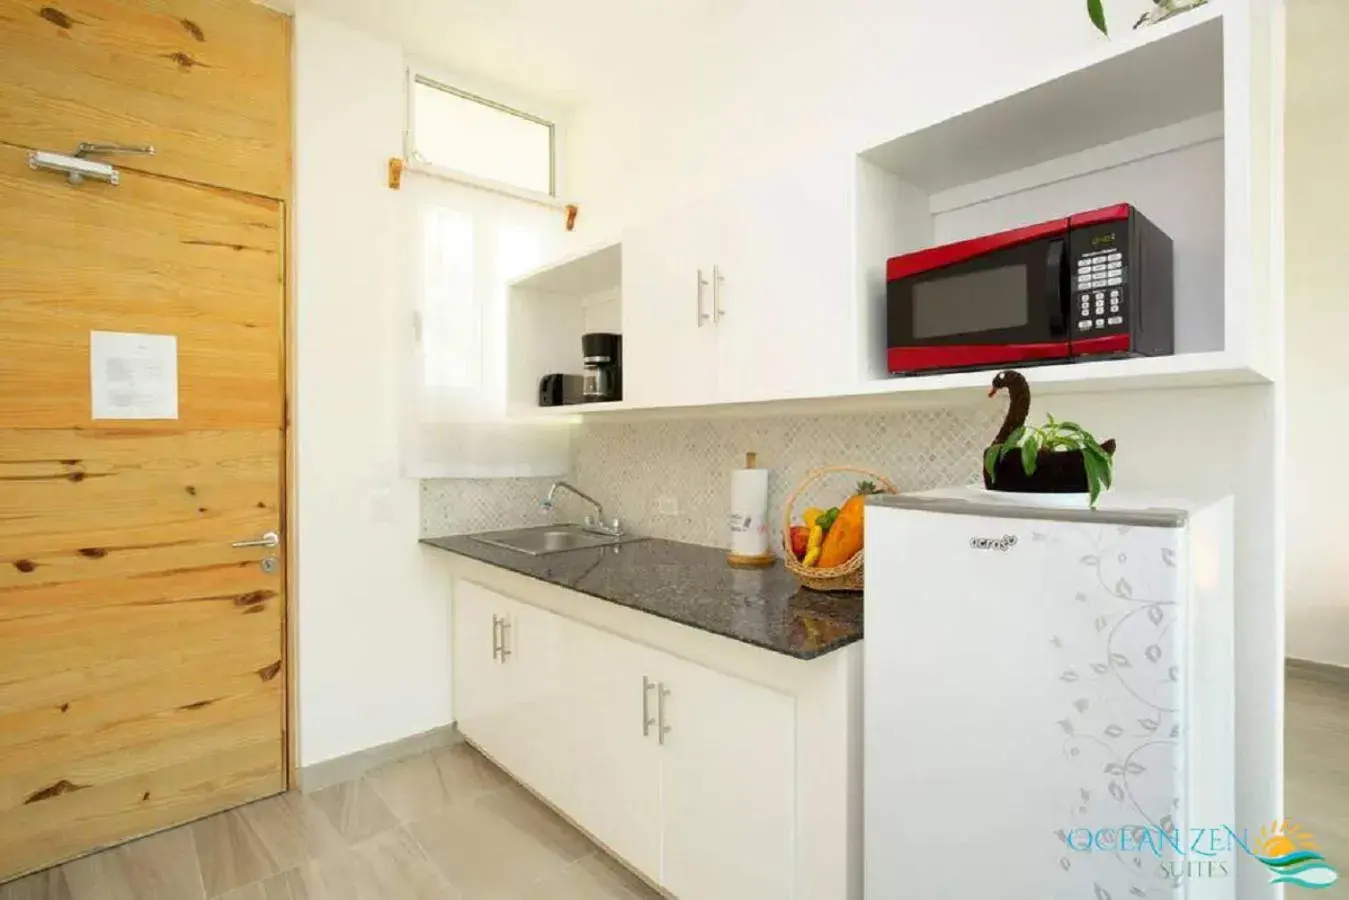 Other, Kitchen/Kitchenette in Ocean Zen Suites on 5th Avenue - Adults Only